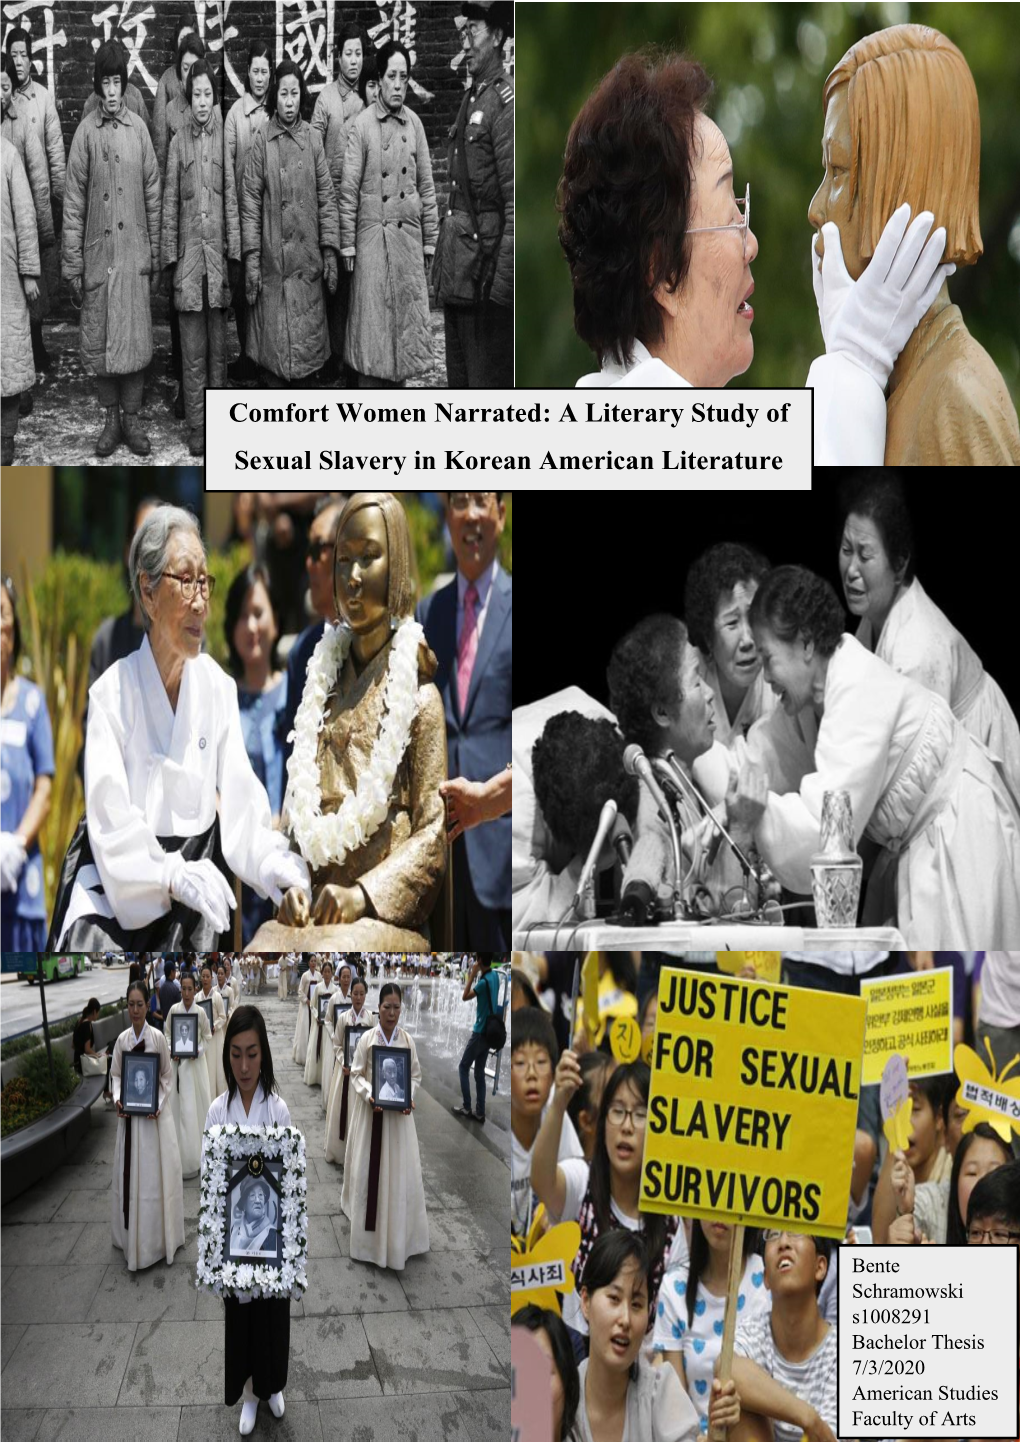 Comfort Women Narrated: a Literary Study of Sexual Slavery in Korean American Literature